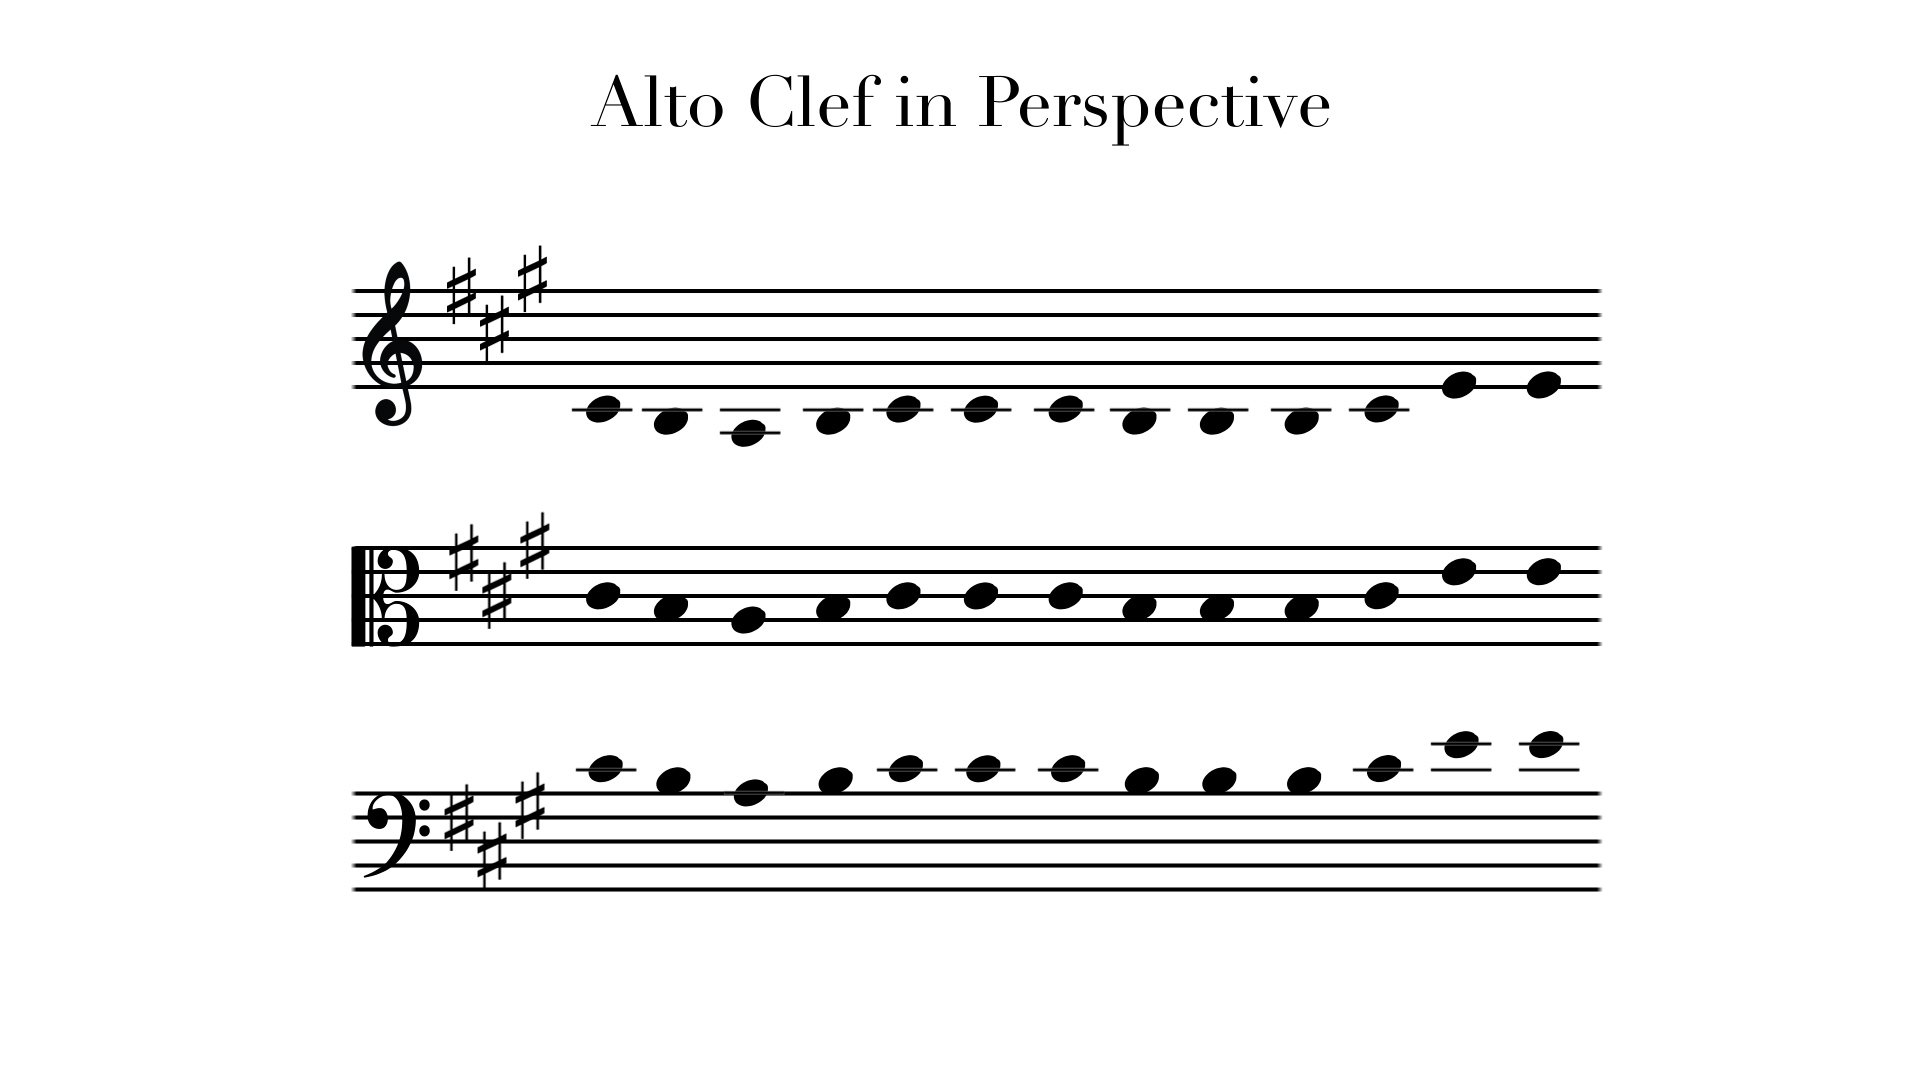 How To Go From Treble Clef To Alto Clef